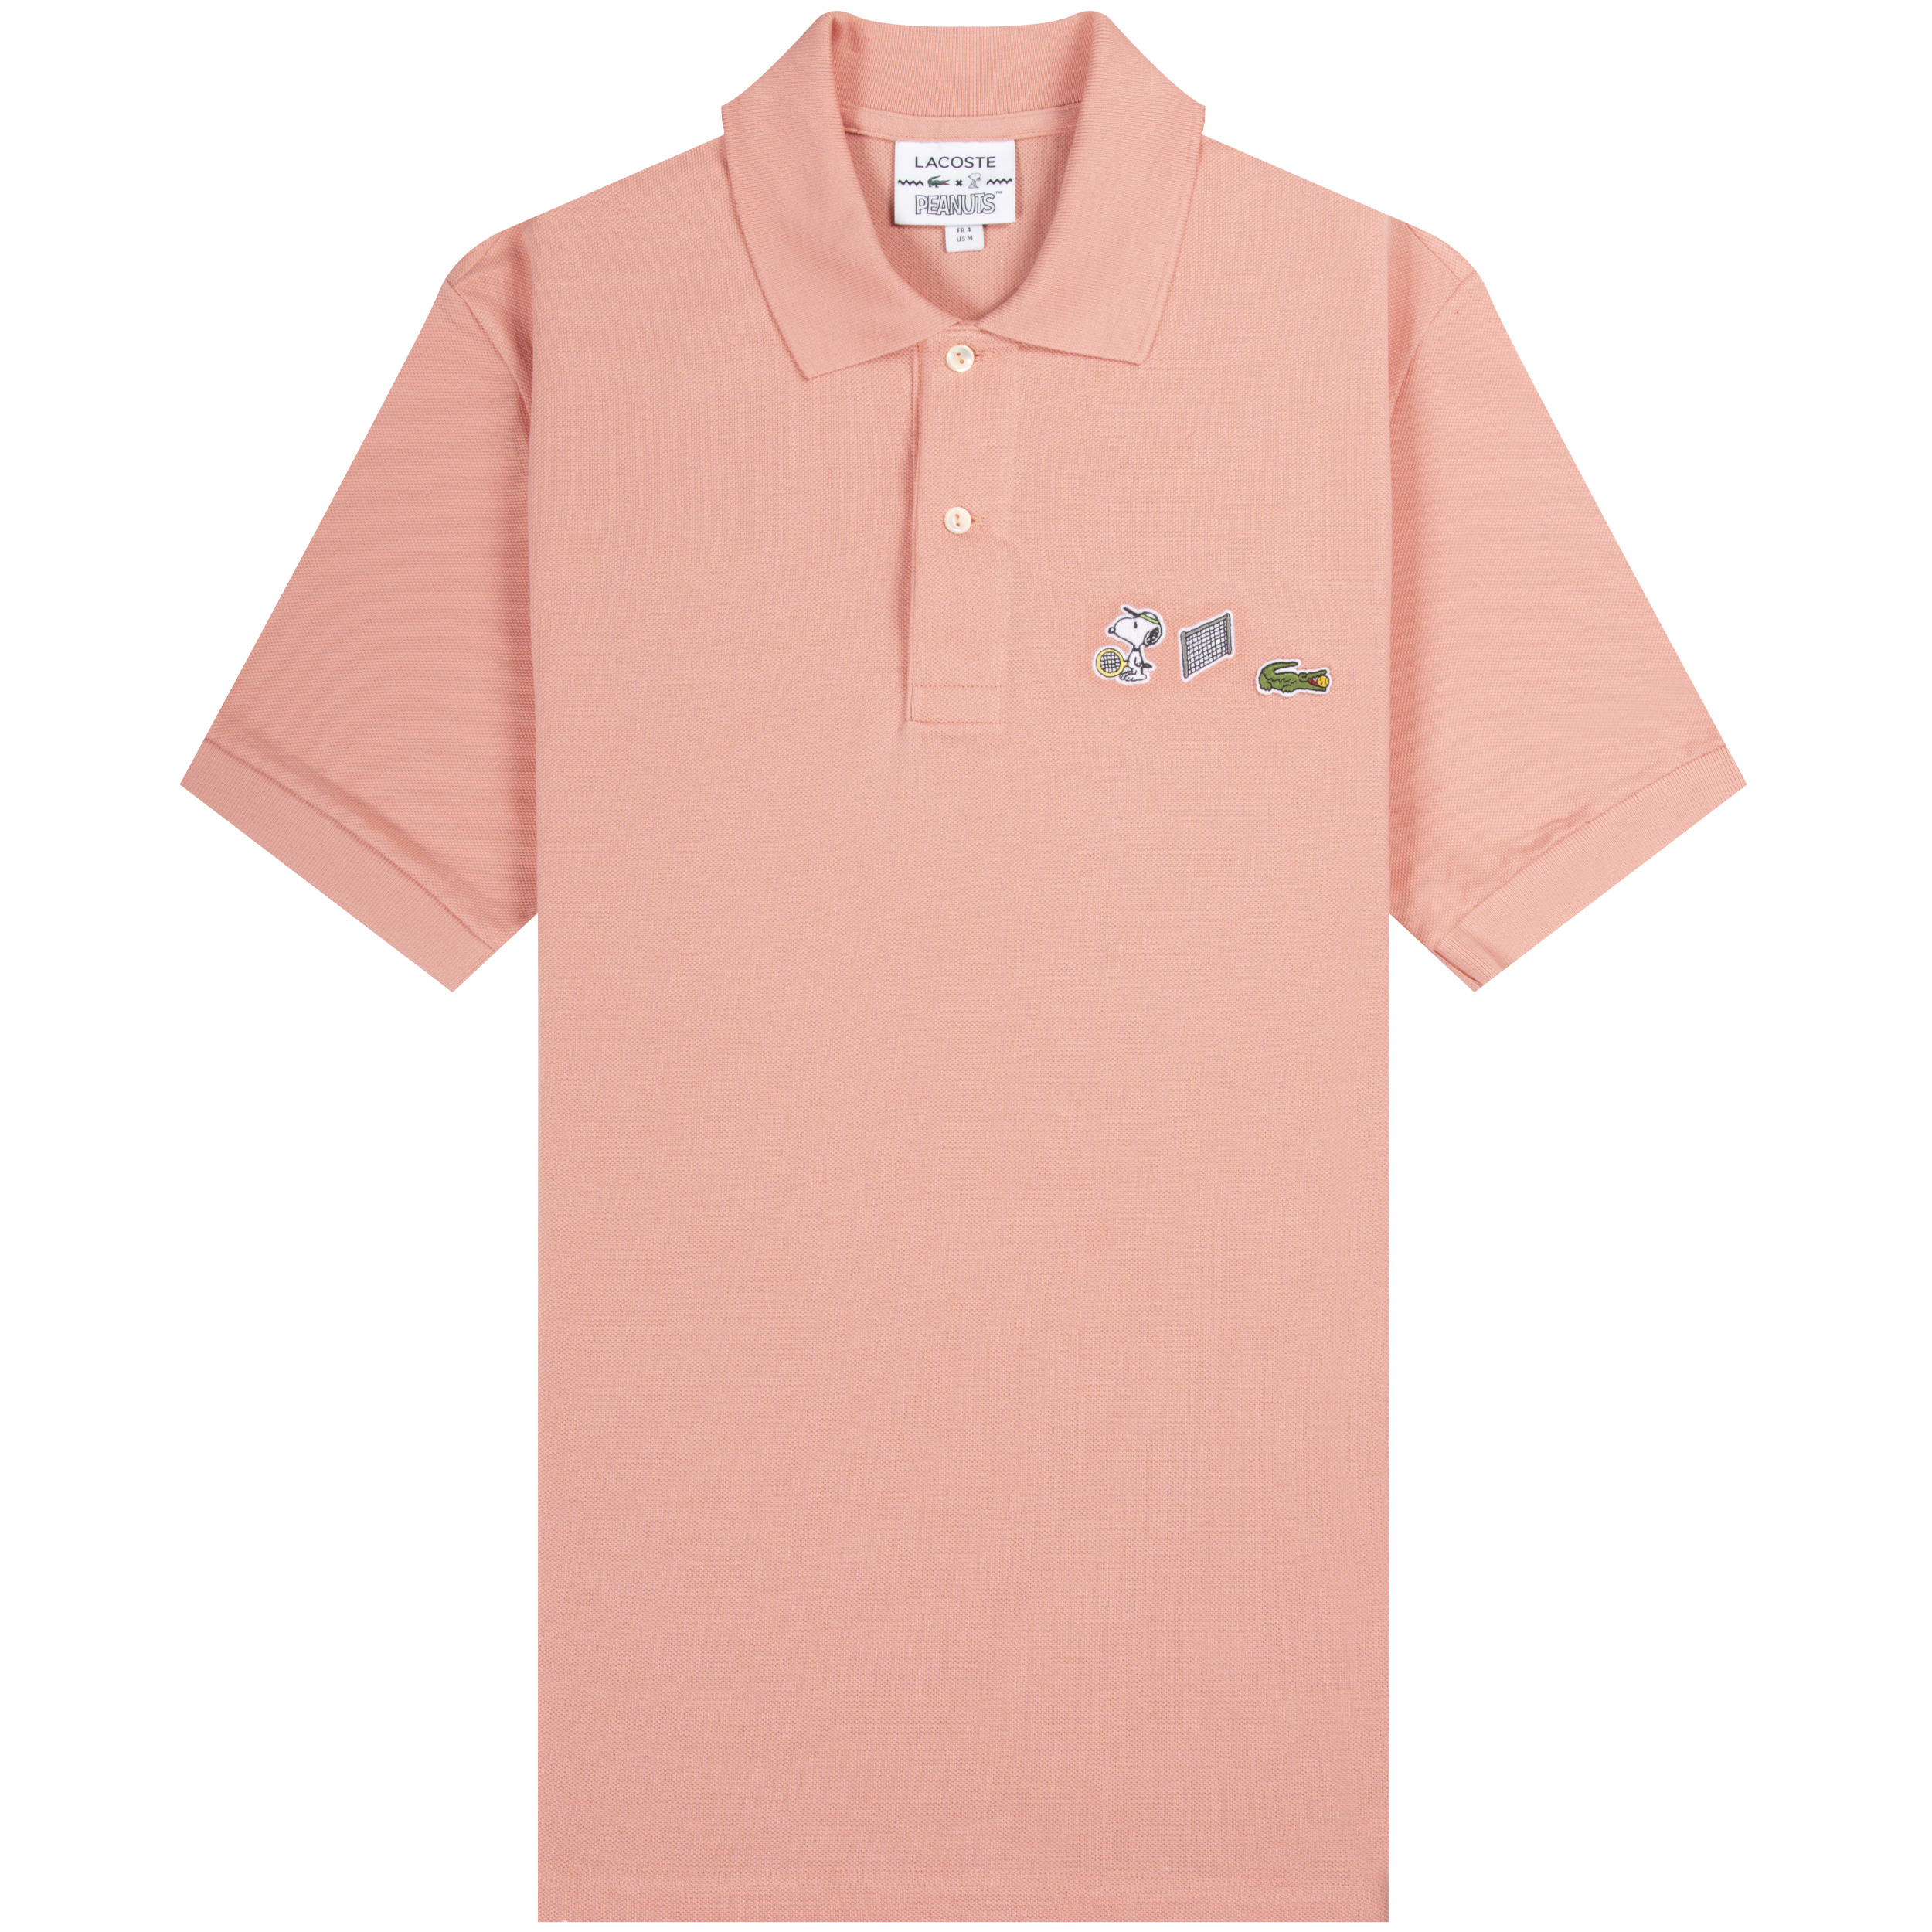 Lacoste X Peanuts ’Embroidered’ Snoopy VS Croc Tennis Match Logo Polo Rose